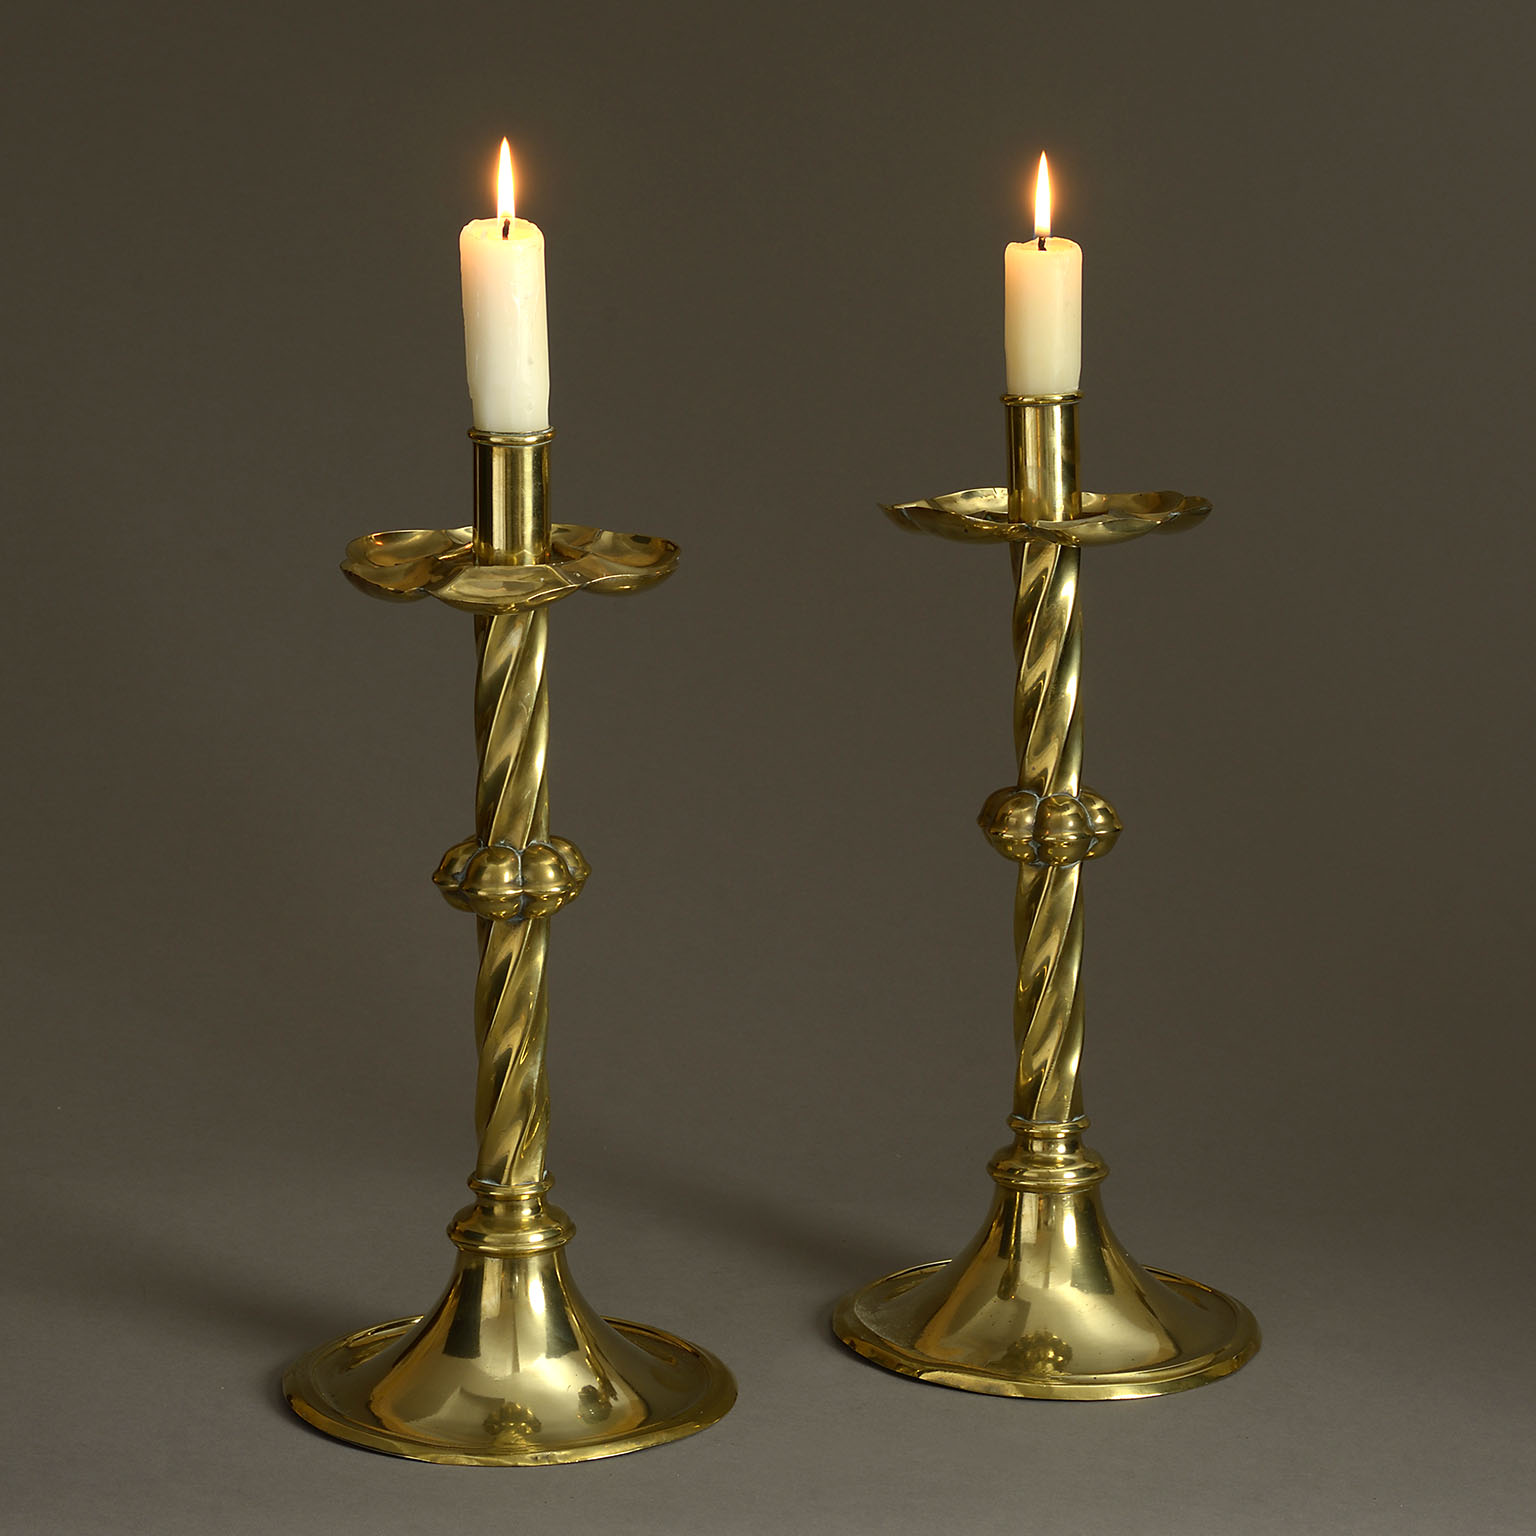 Large Pair of Mid-19th Century Victorian Brass Candlesticks | Timothy  Langston Fine Art & Antiques